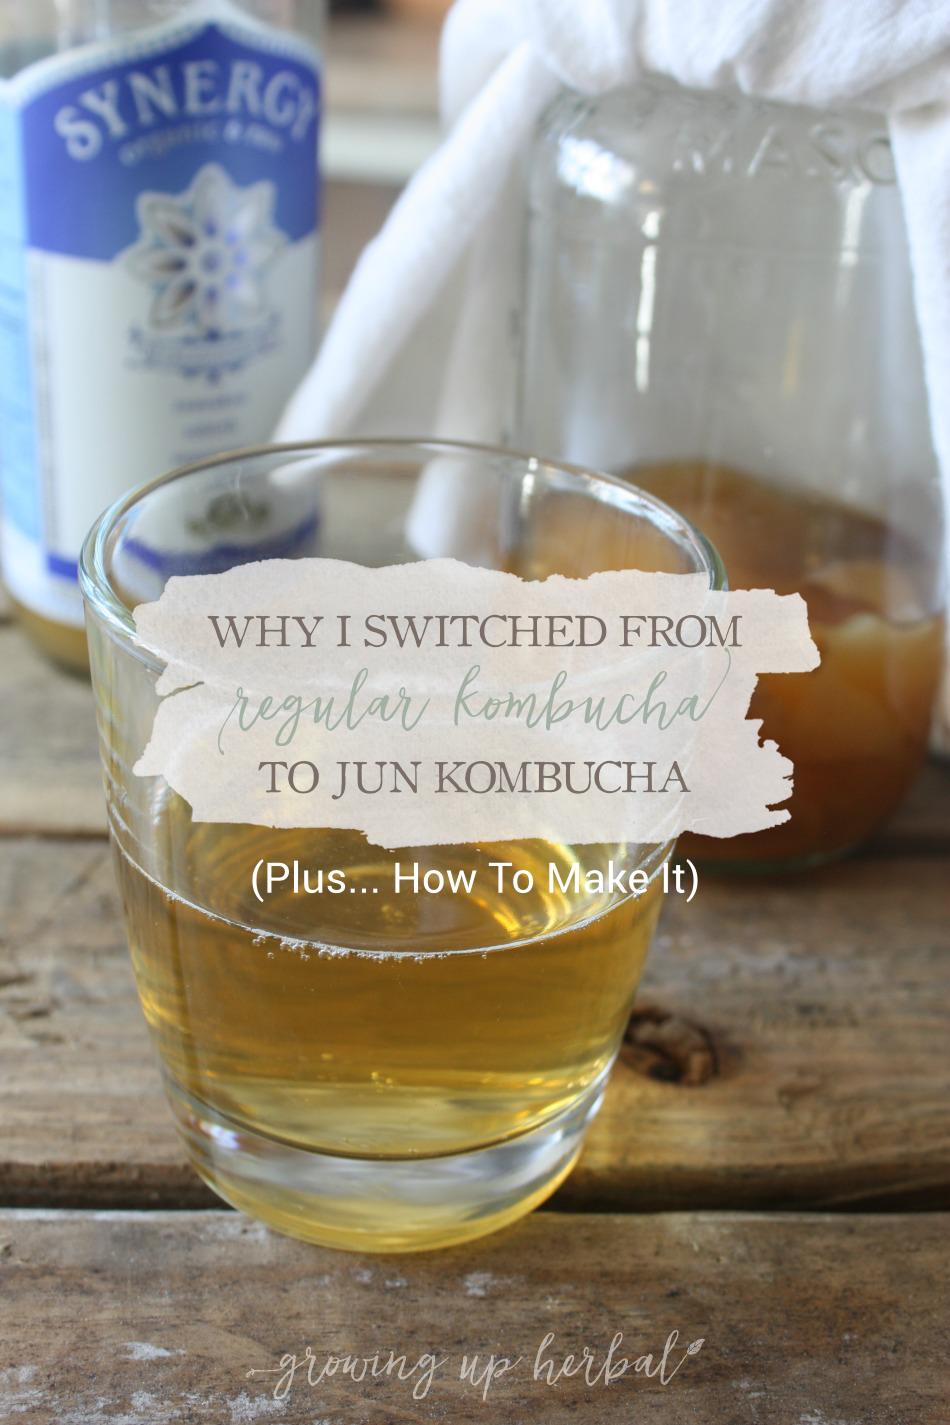 Why I Switched From Regular Kombucha To Jun Kombucha (+ How To Make It) | Growing Up Herbal | Have you heard of "jun kombucha?" Here's why I'm drinking it now + a tutorial for how to make it!